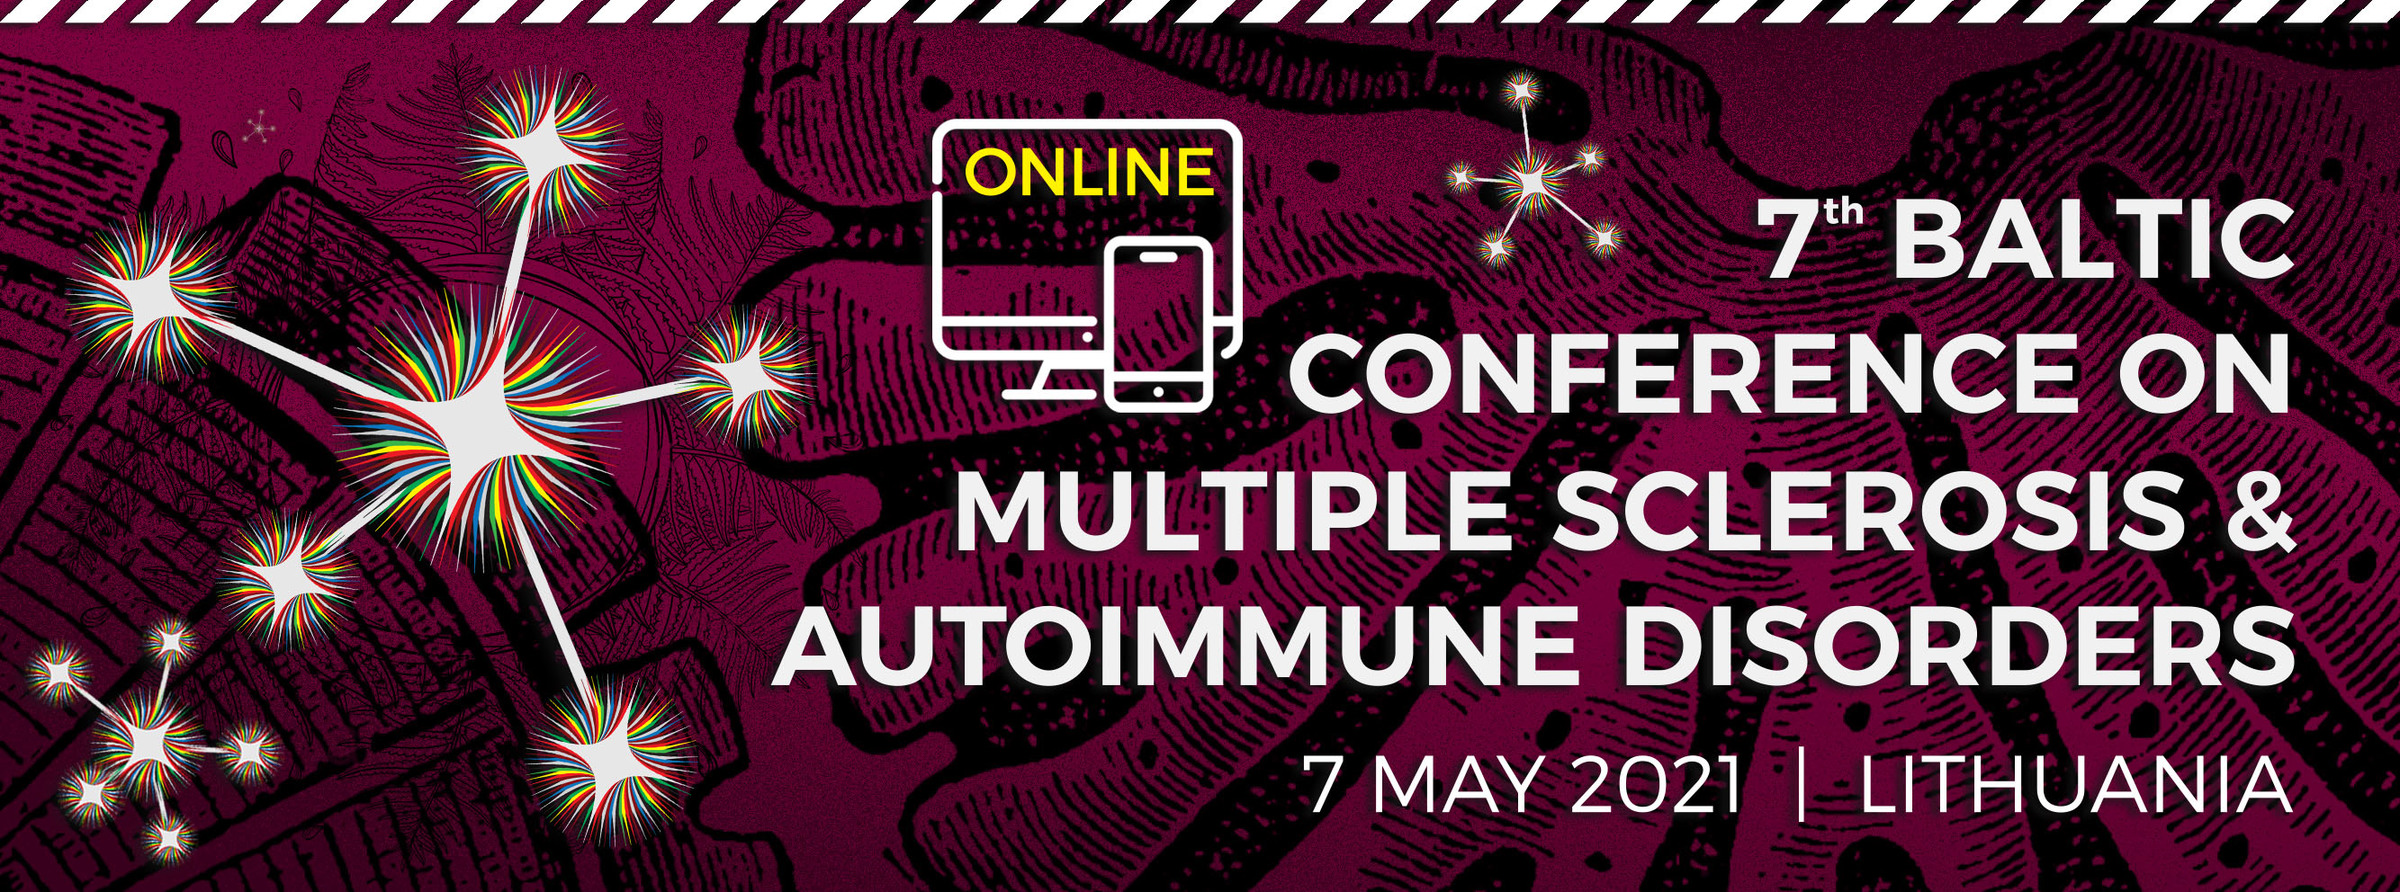 7th Baltic Conference on Multiple Sclerosis and Autoimmune Disorders